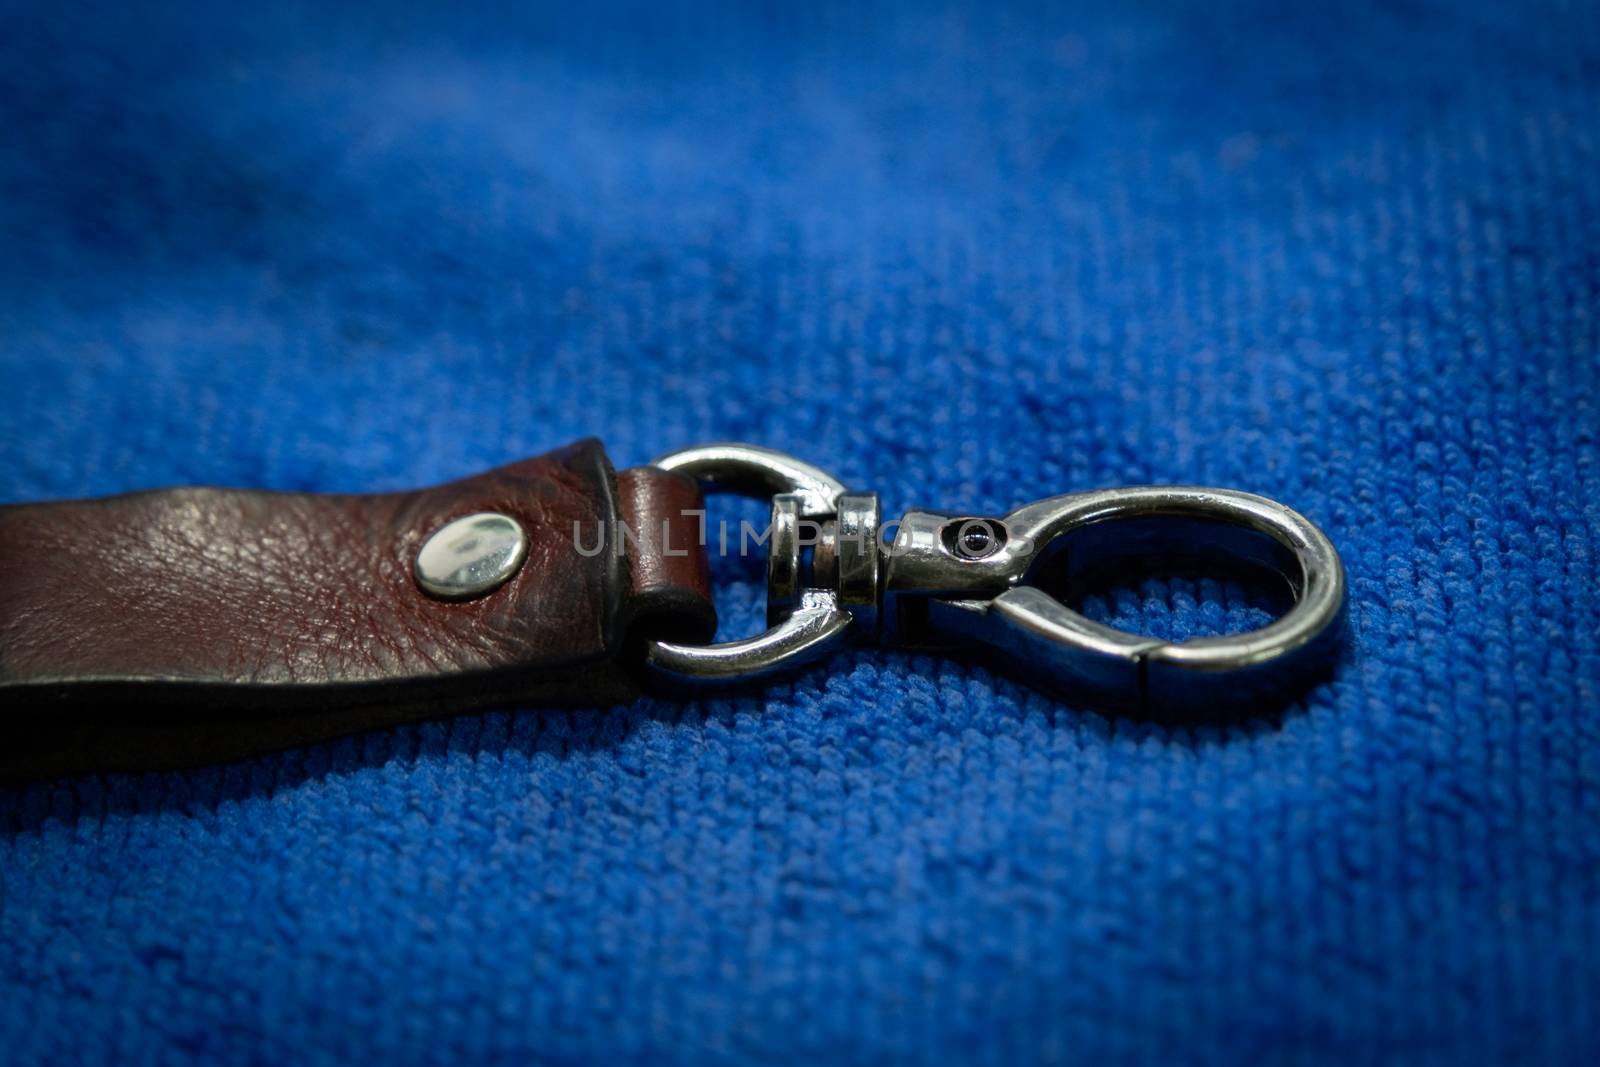 A Select focus Leather key chain with box on blue fabric background by peerapixs